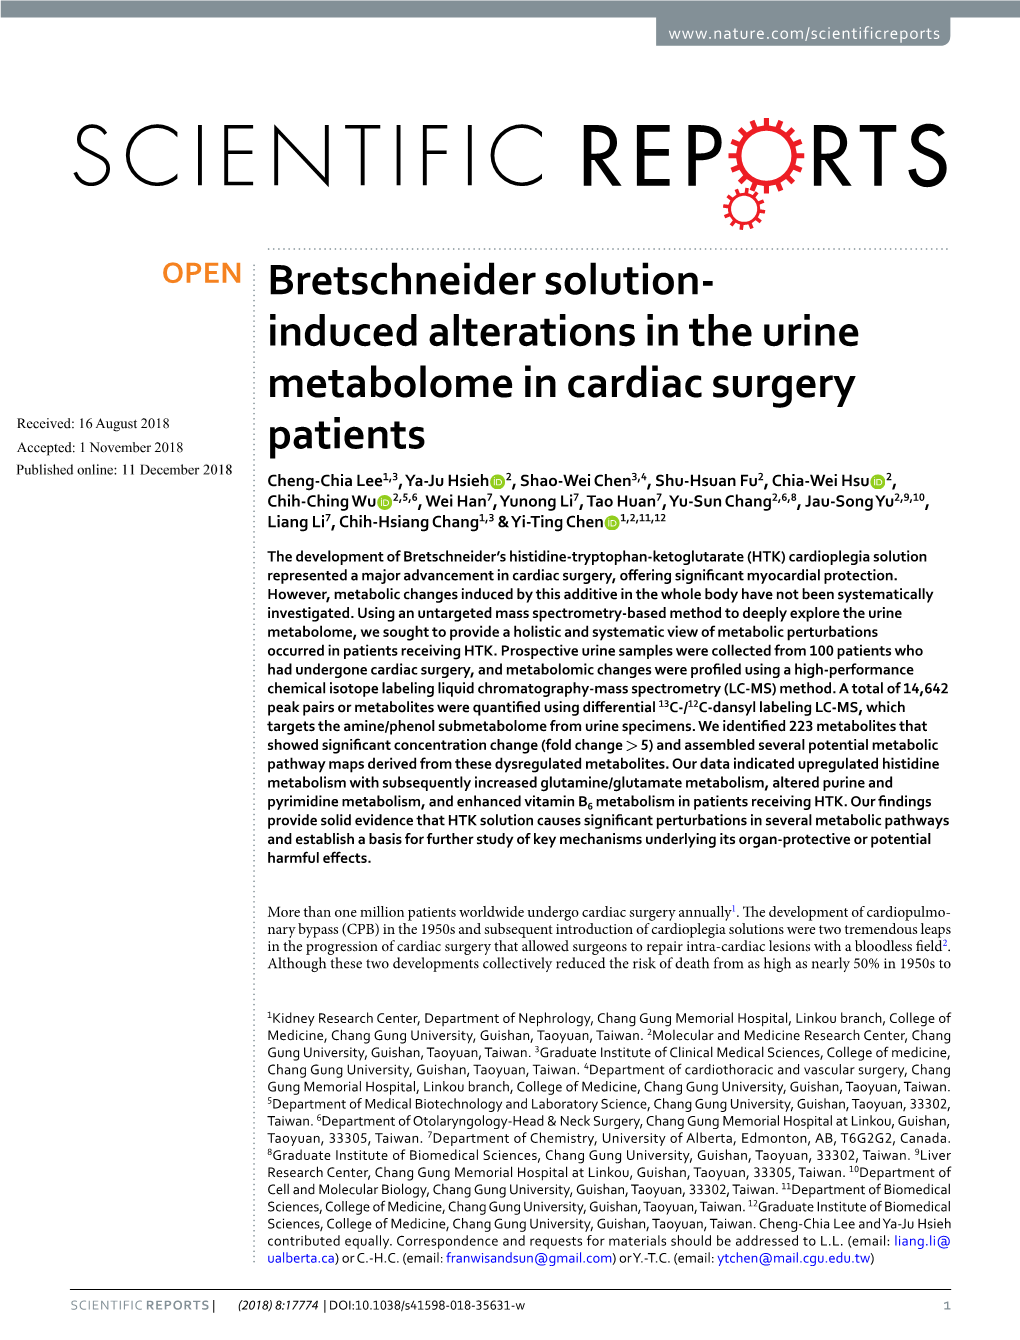 Induced Alterations in the Urine Metabolome in Cardiac Surgery